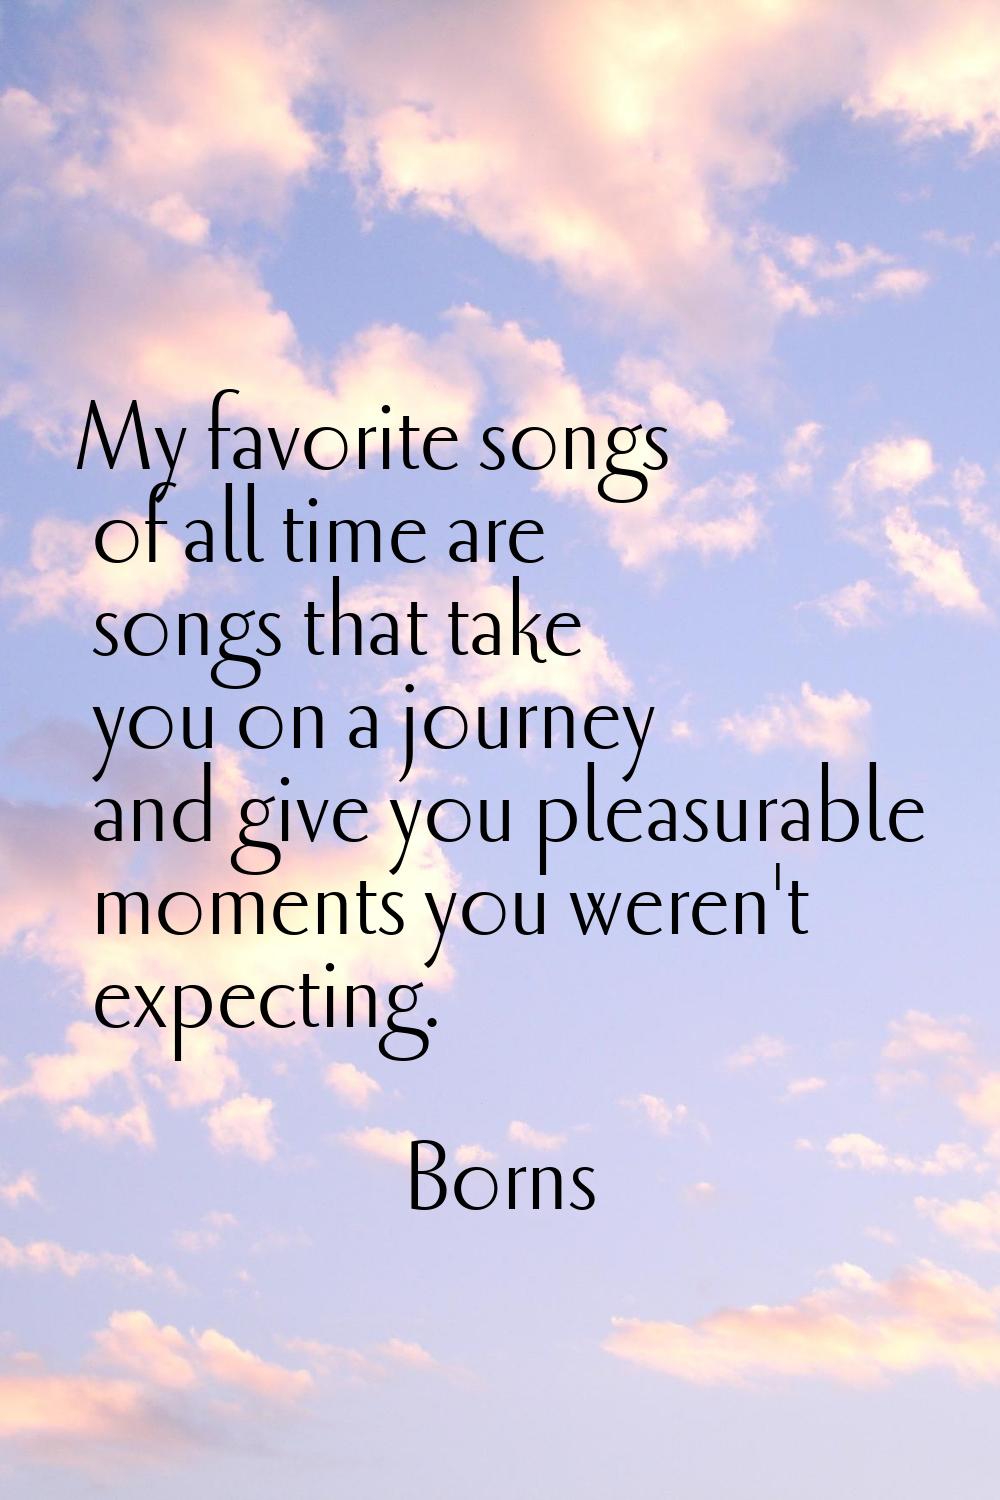 My favorite songs of all time are songs that take you on a journey and give you pleasurable moments